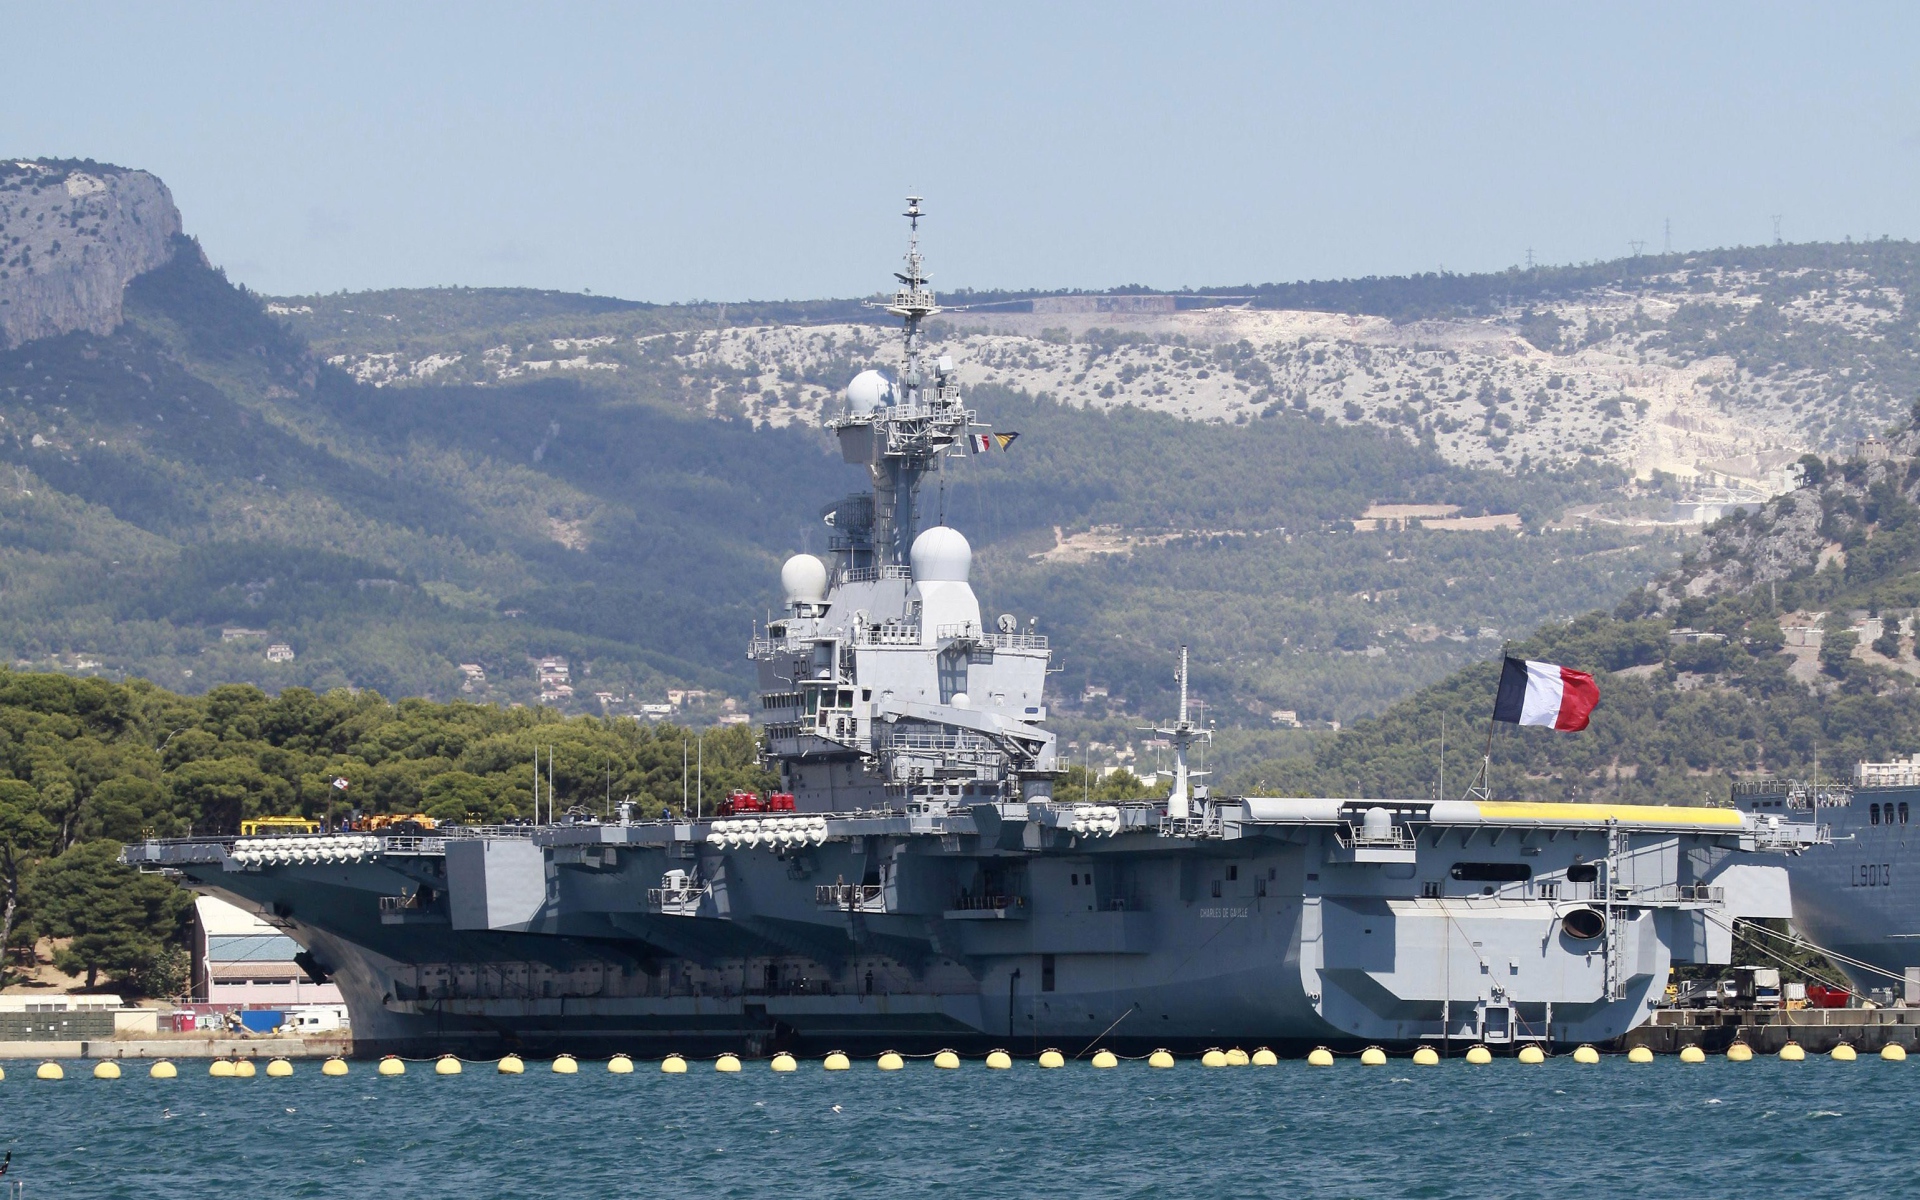 Aircraft carrier Charles de Gaulle French Navy